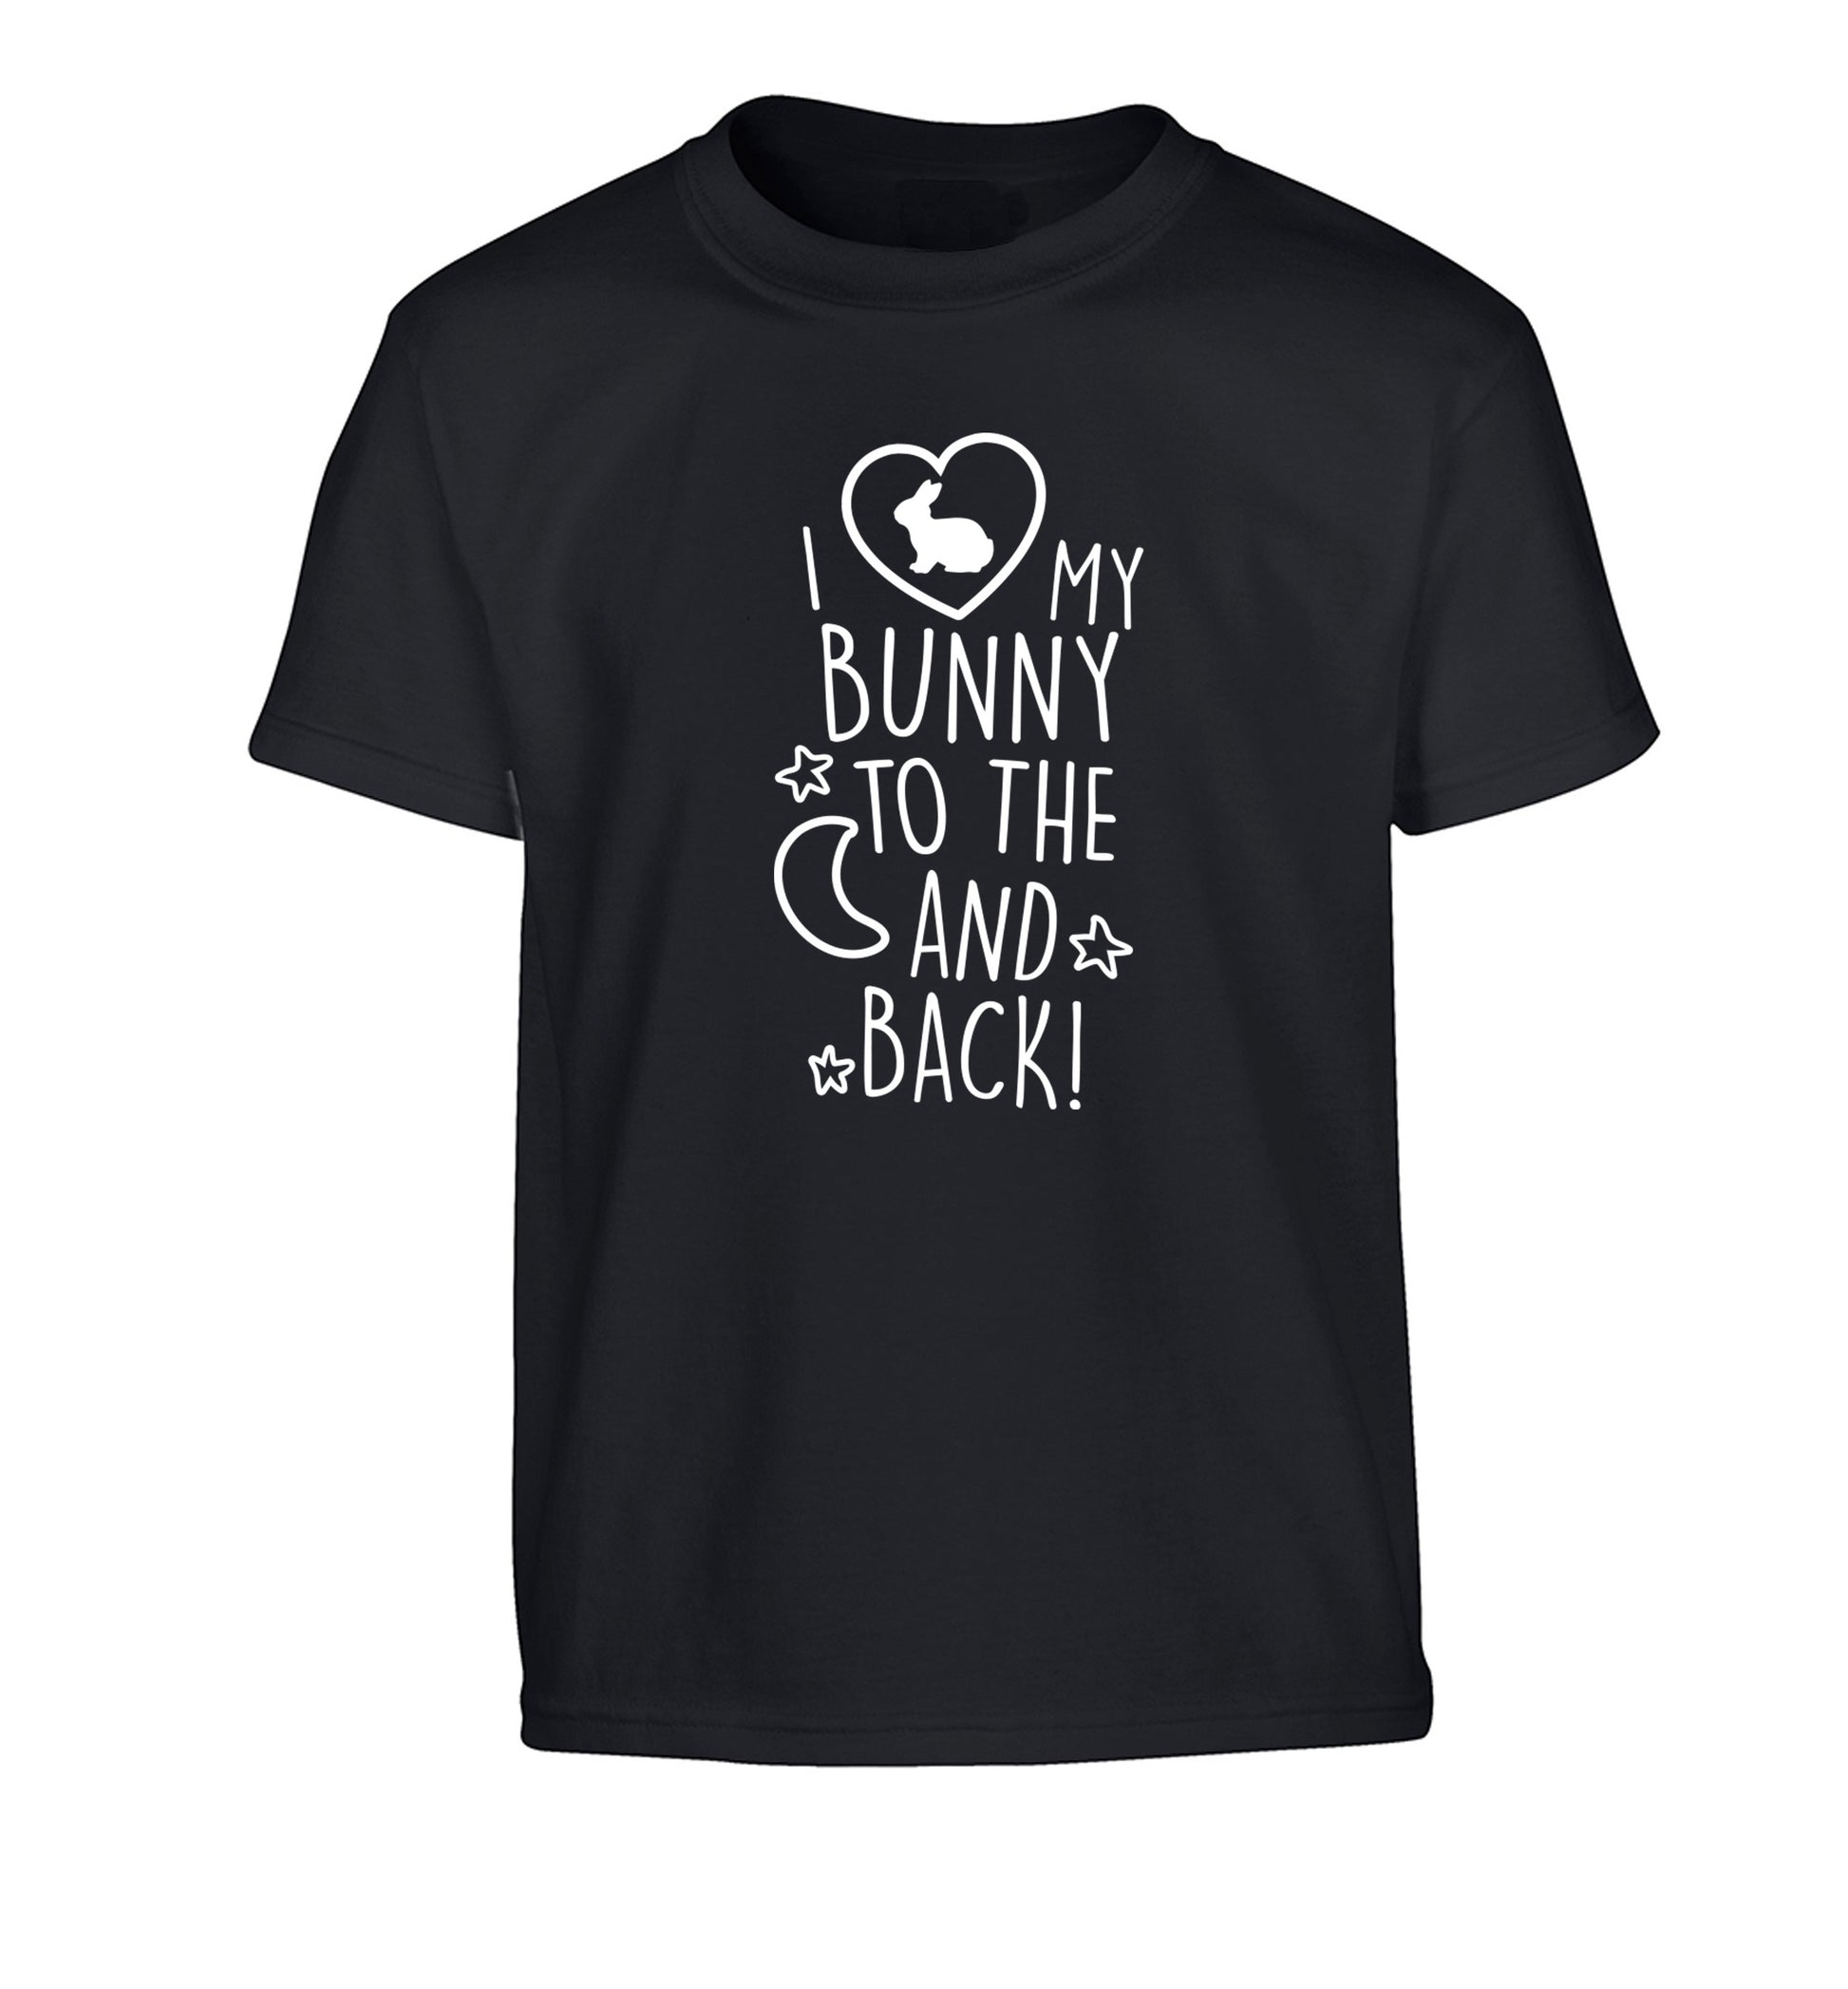 I love my bunny to the moon and back Children's black Tshirt 12-14 Years